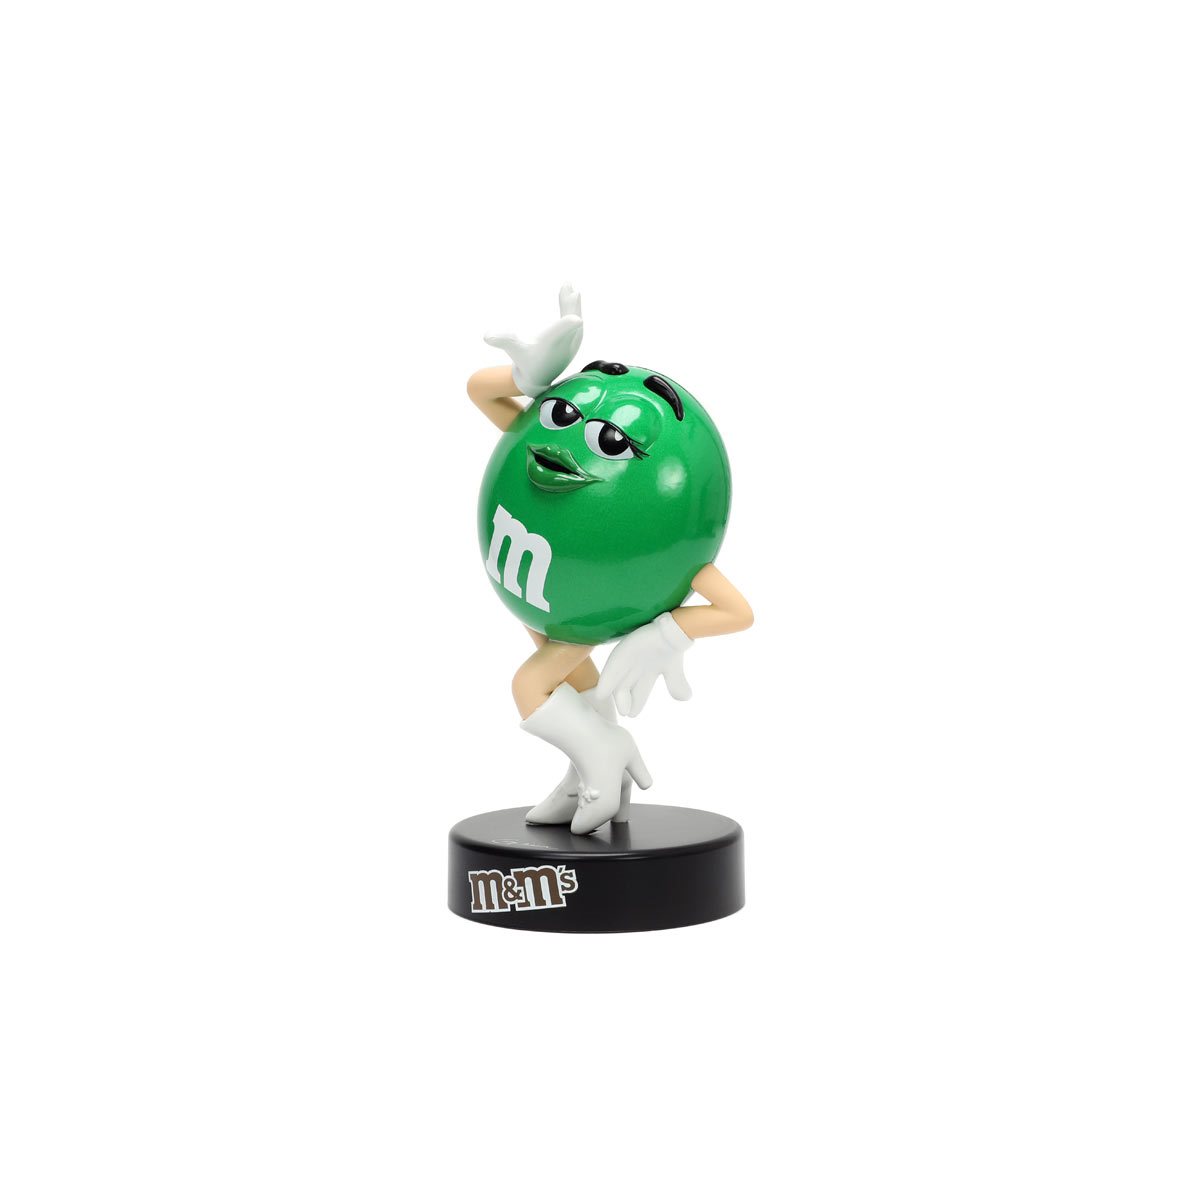 Green M & M with gift boxes  Christmas characters, M&m characters